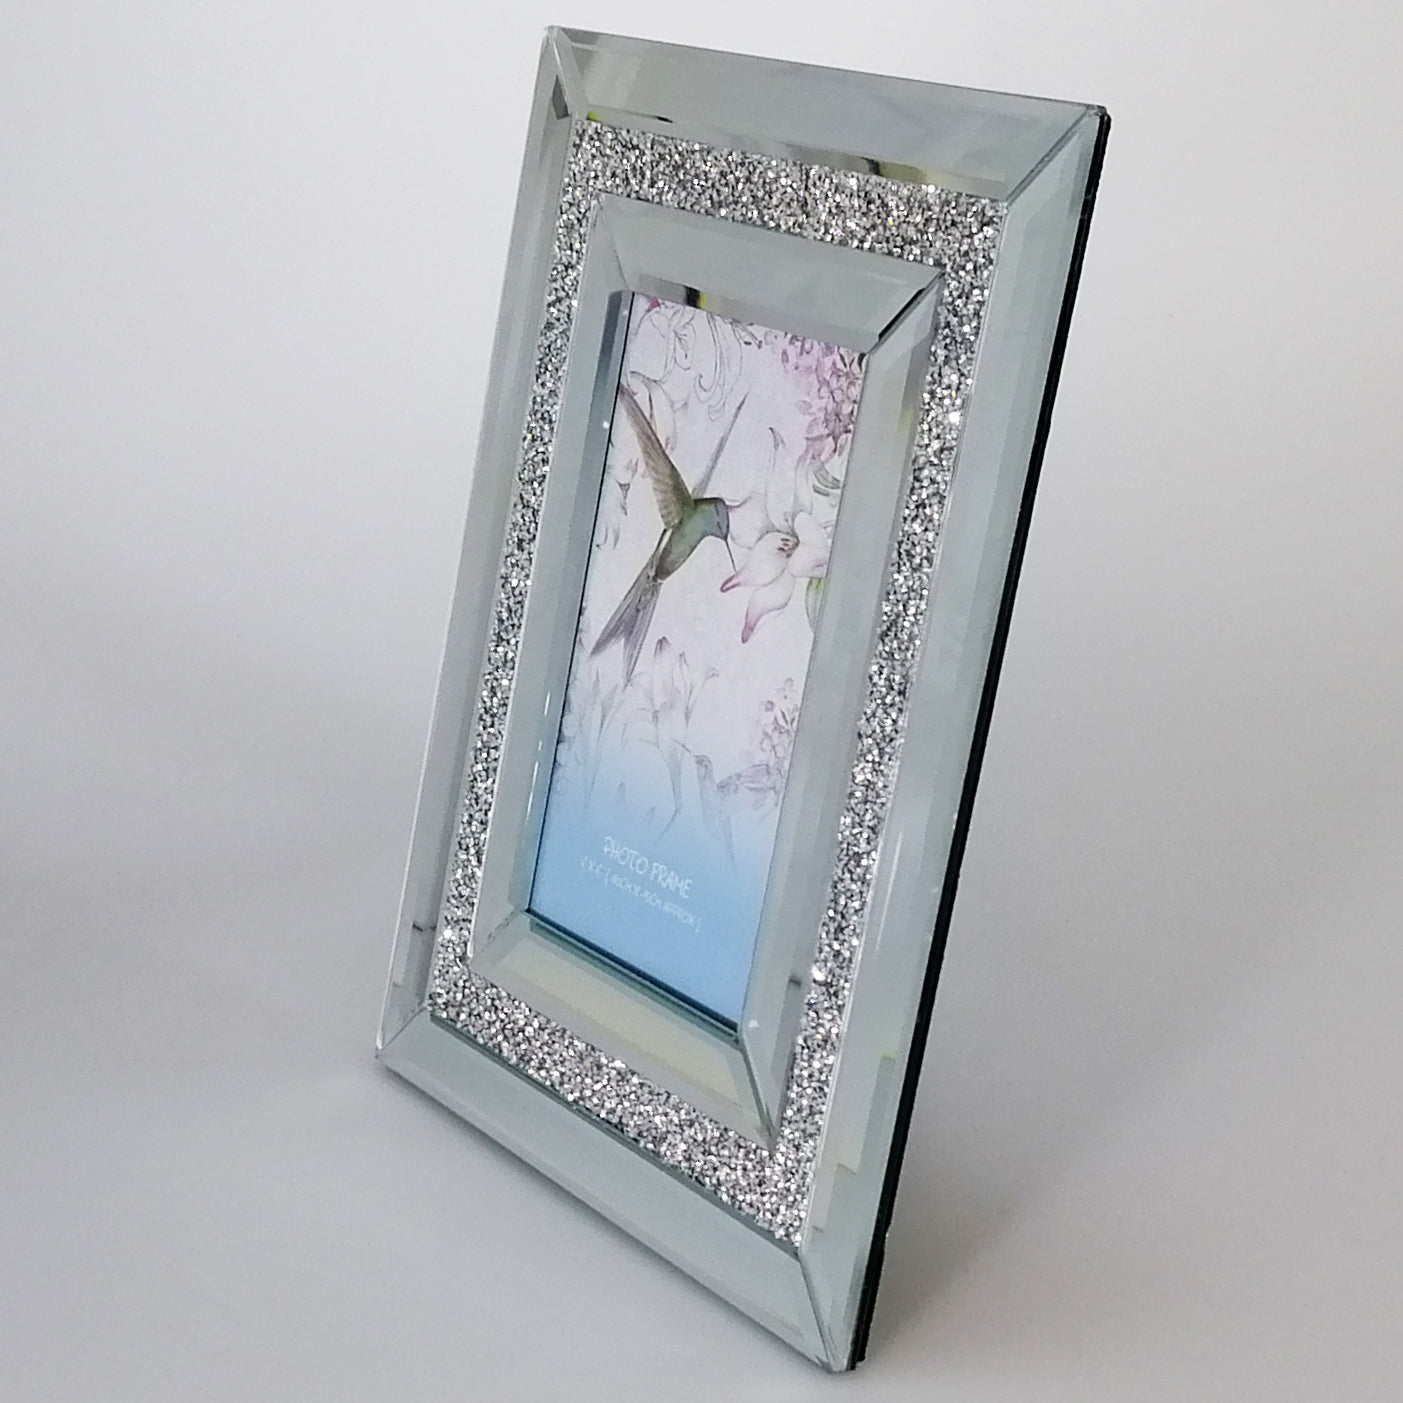 Mirror and Glass Photo Frame - 4"x 6"